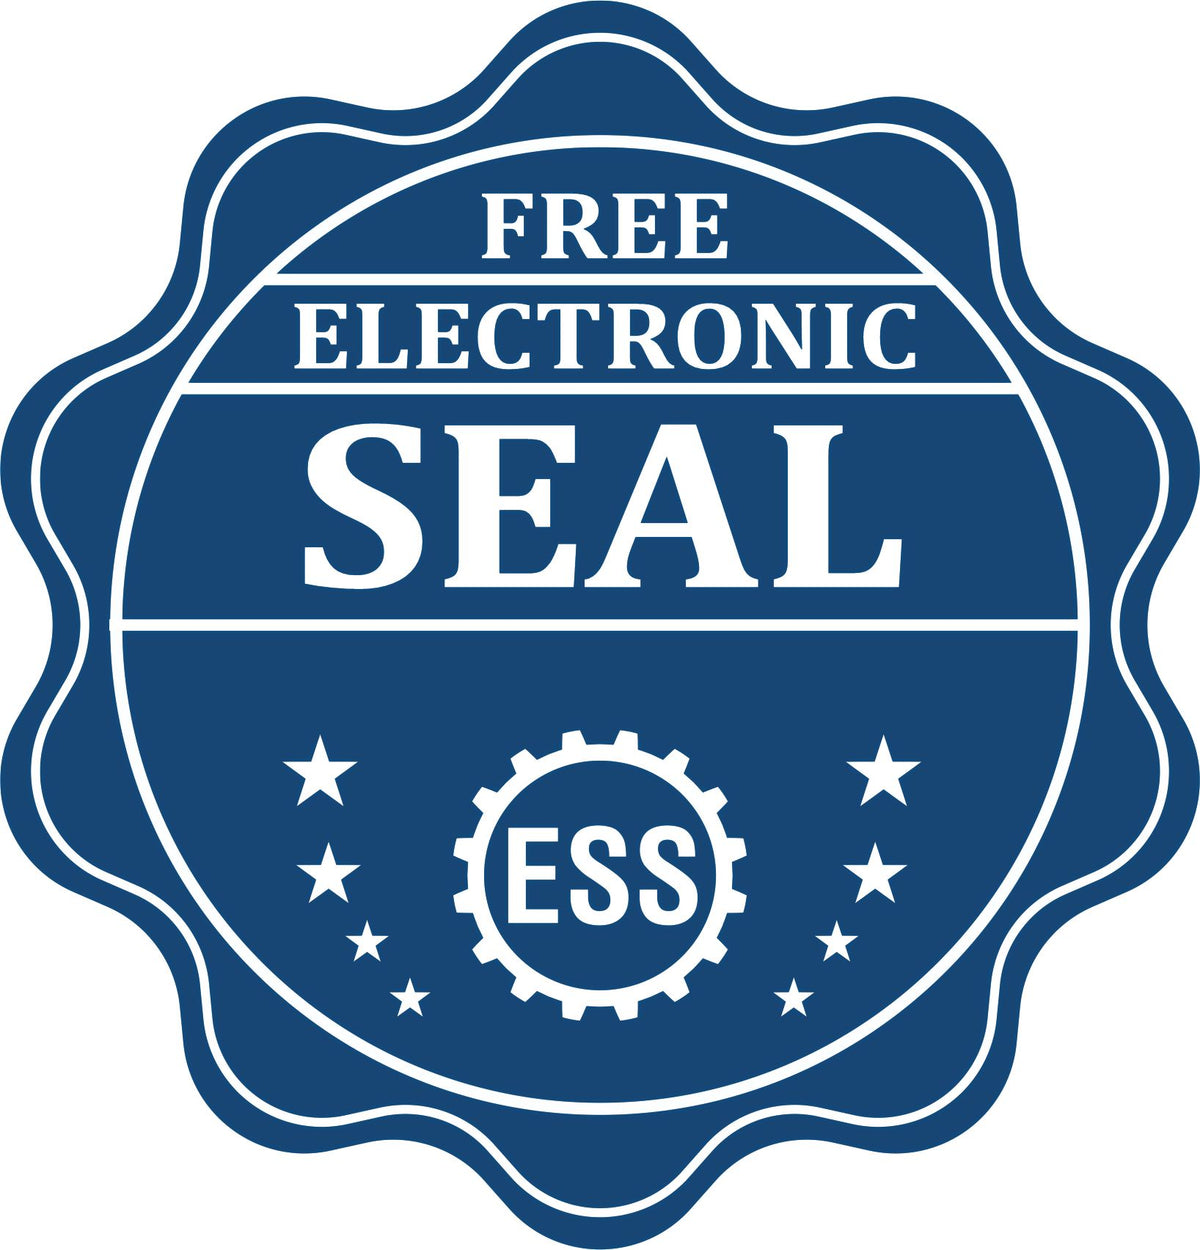 A badge showing a free electronic seal for the Gift Illinois Geologist Seal with stars and the ESS gear on the emblem.